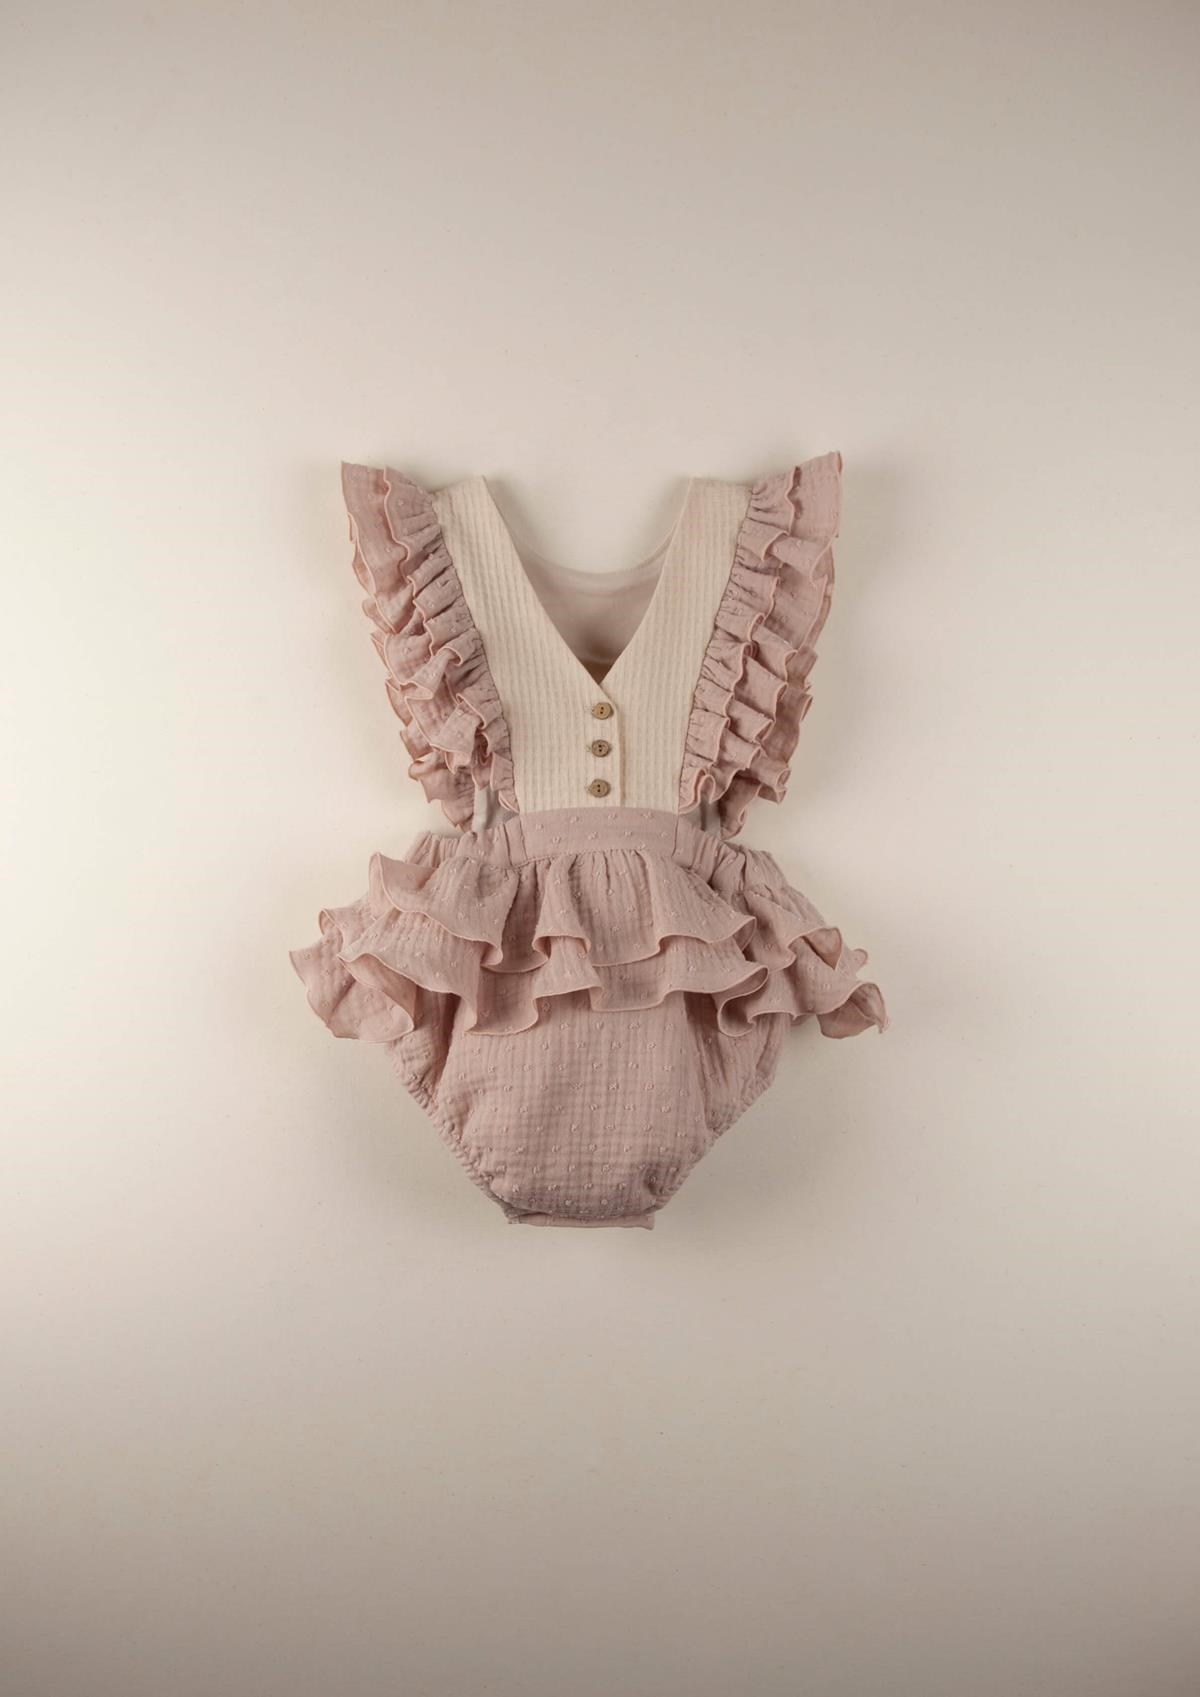 Mod.6.2 Pink romper suit with embroidered bib | SS22 Mod.6.2 Pink romper suit with embroidered bib | 1